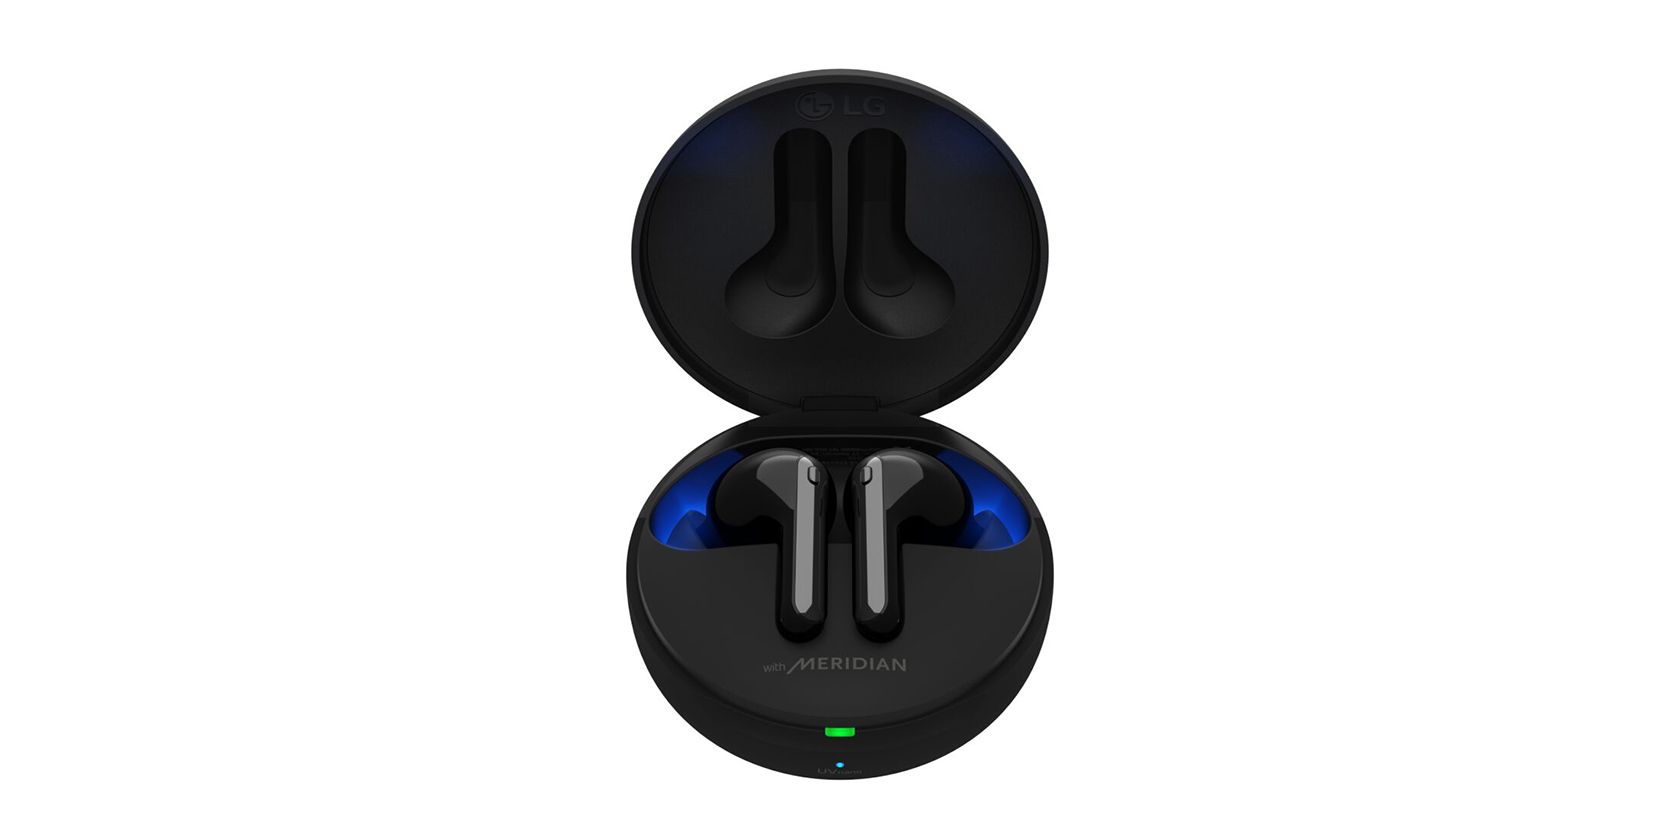 Tone Free FN7 earbuds